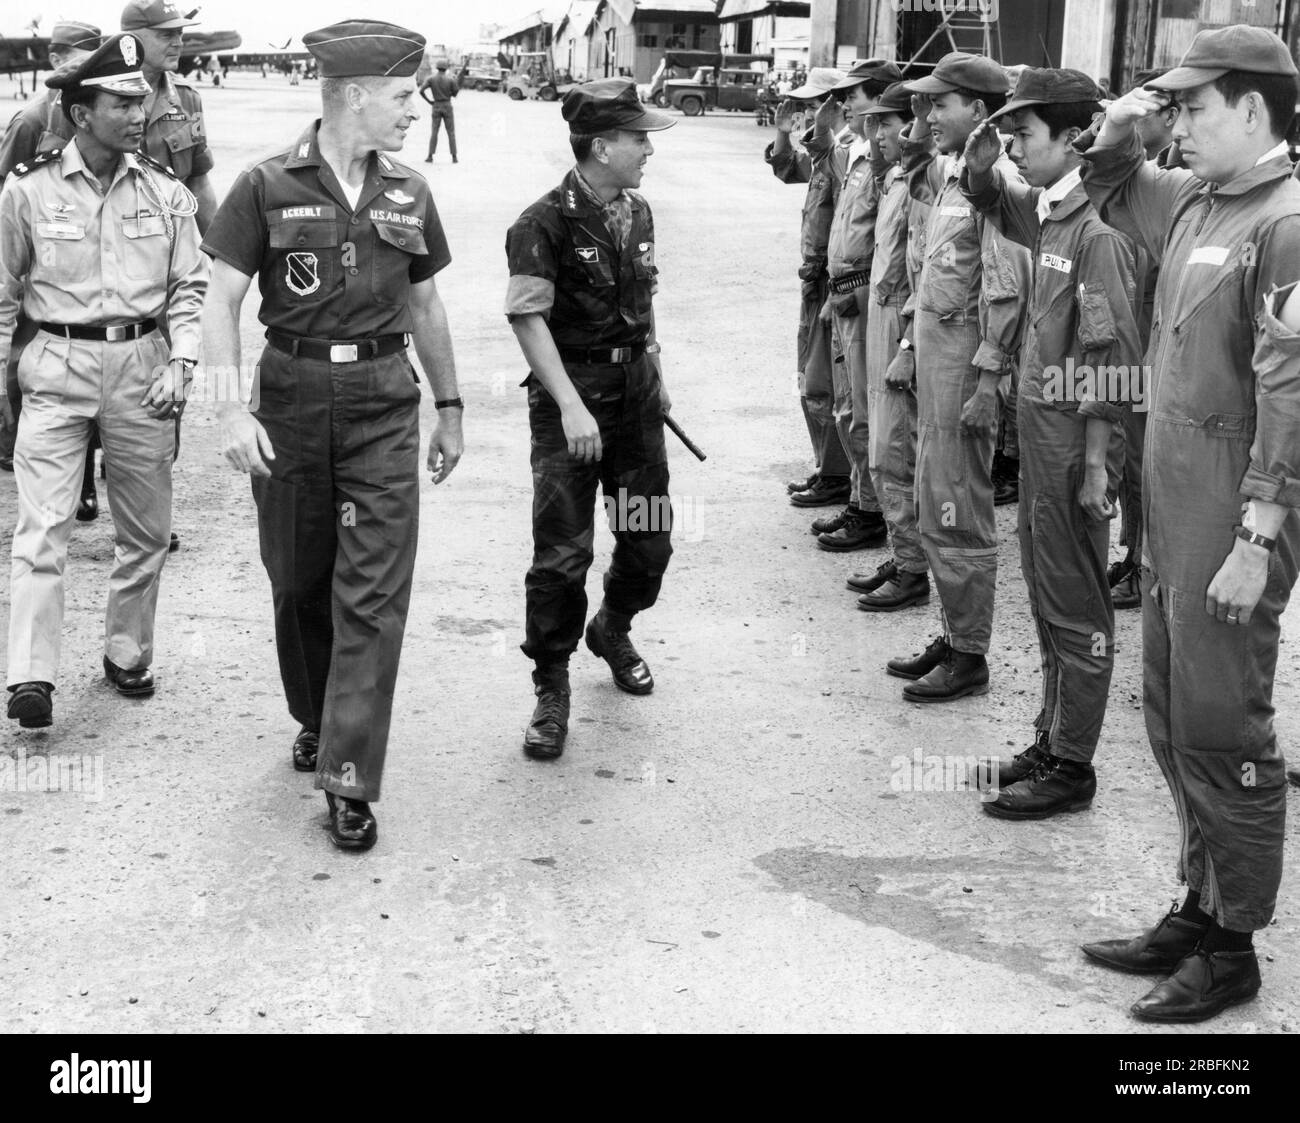 Bien Hoa, Vietnam: January 6, 1965 U.S. Air Force 3rd Tactical Fighter Wing Commander Col. Robert Ackerly escorts Republic of Vietnam Chief of State Nguyen Van Thieu on an inspection tour of the Bien Hoa Air Base. Stock Photo